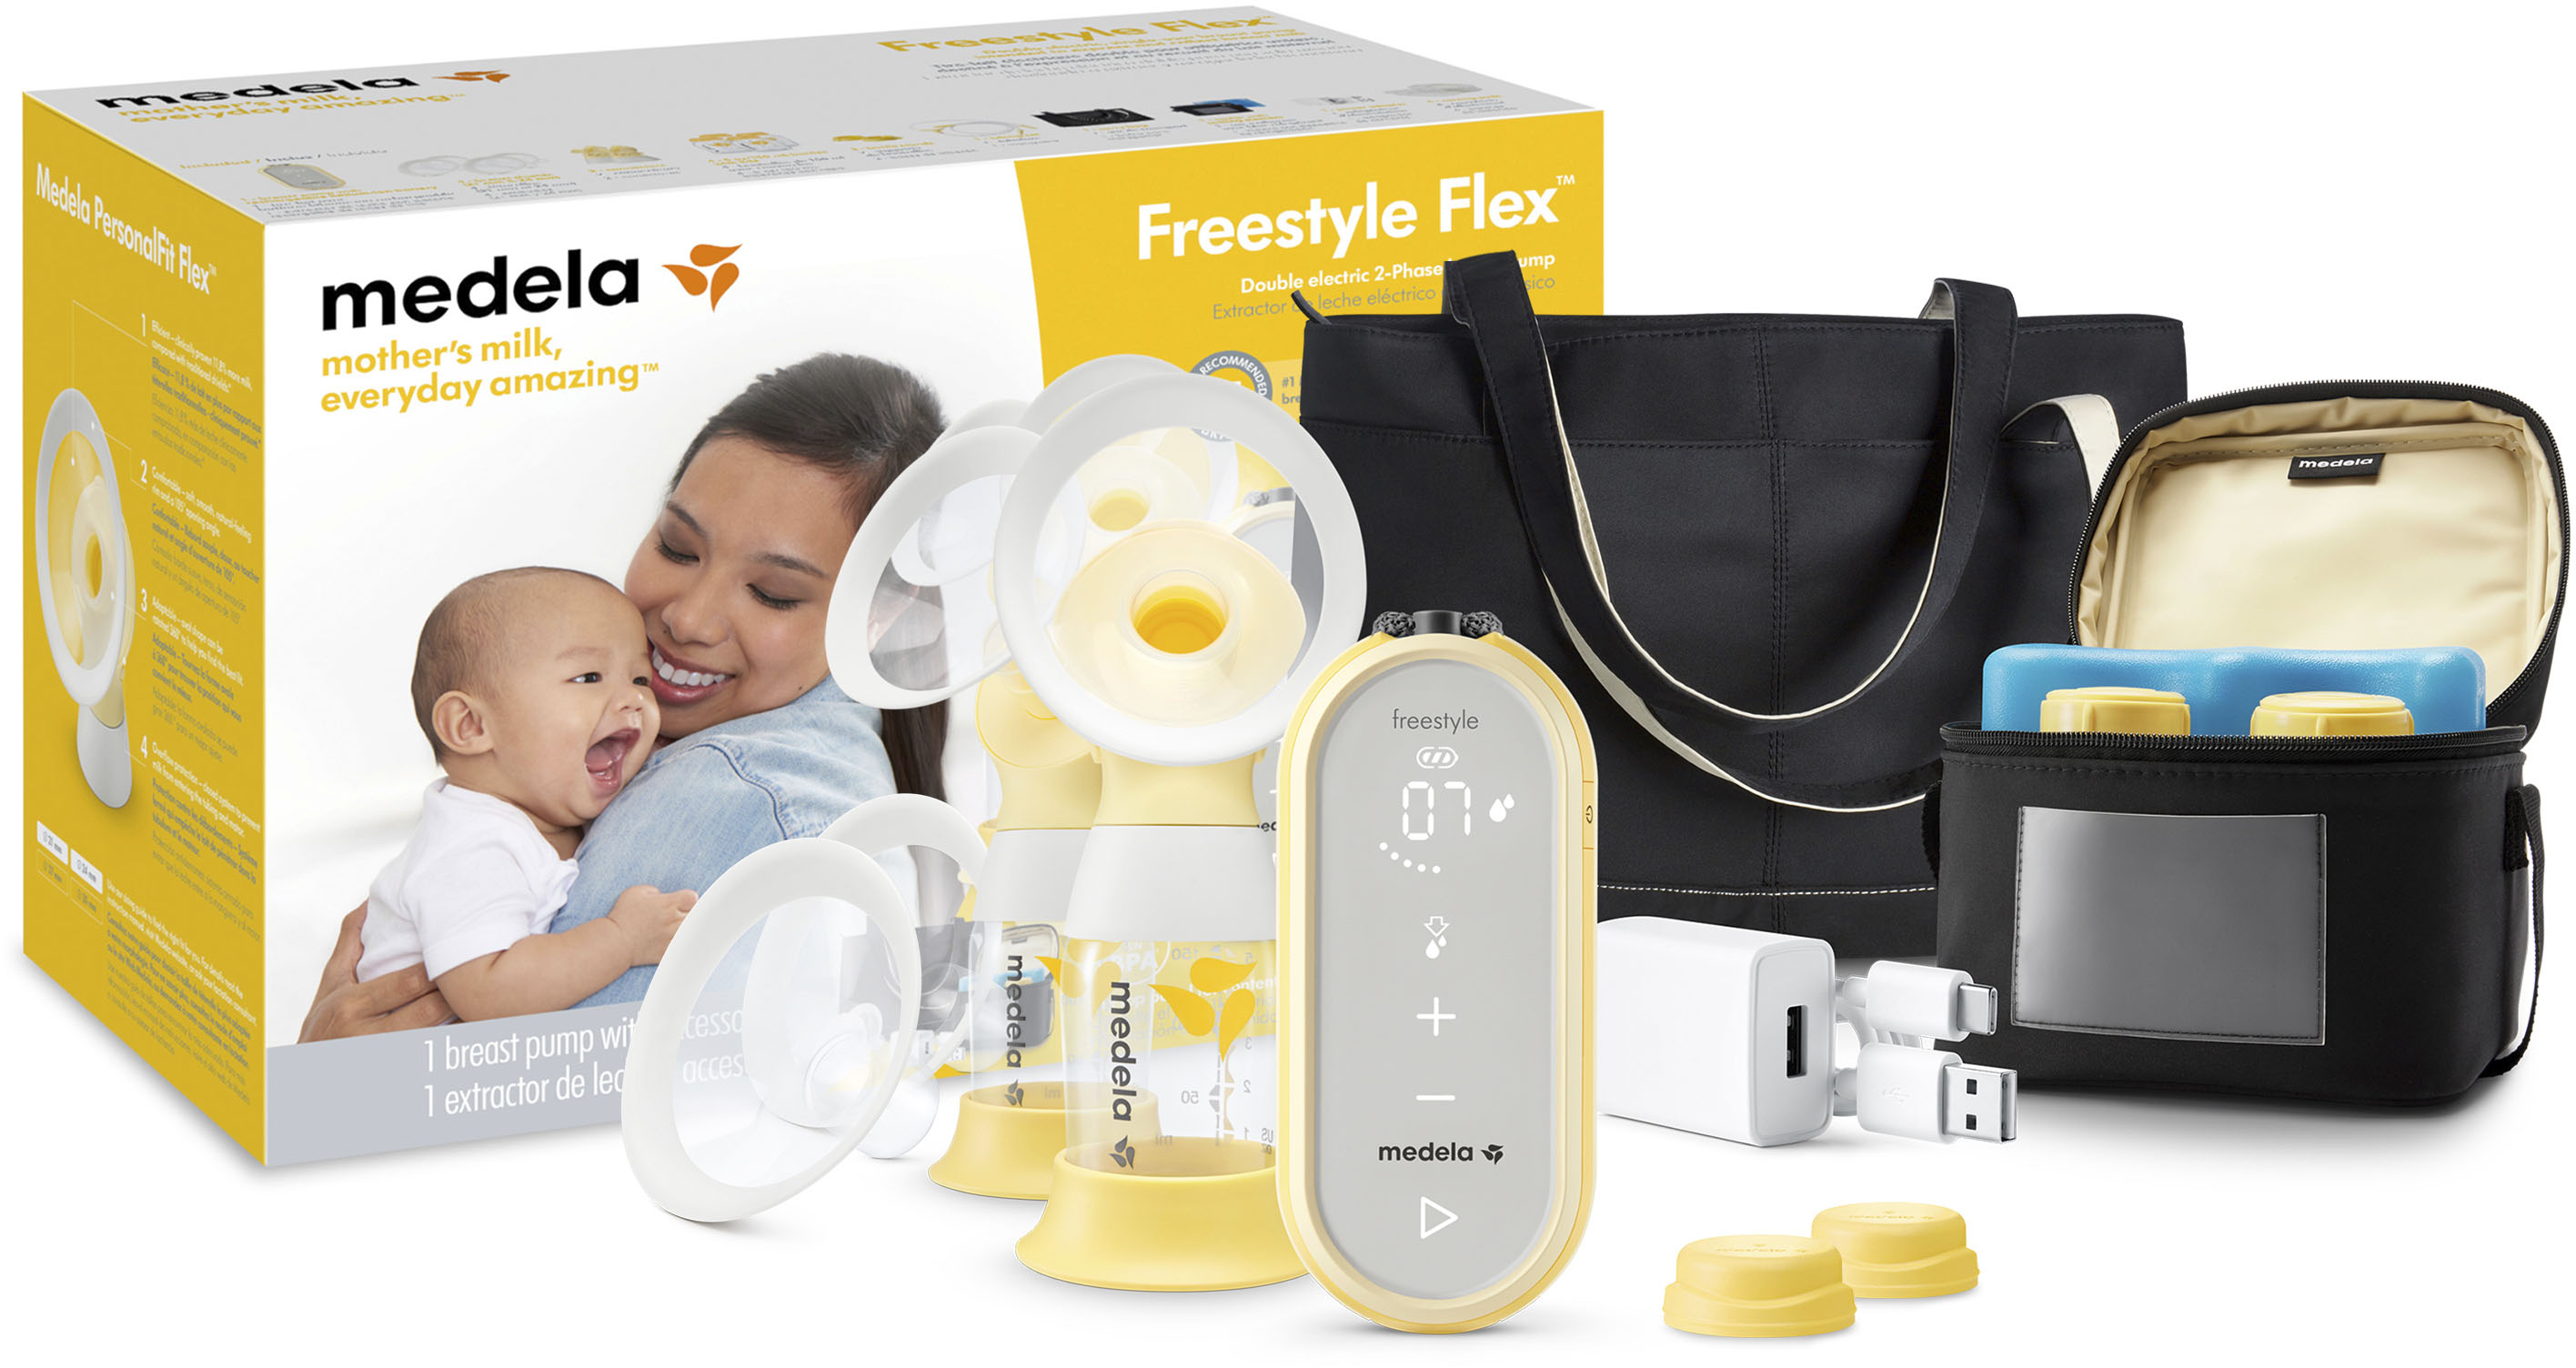 Medela Freestyle Flex Double Electric Breast Pump, Double Electric